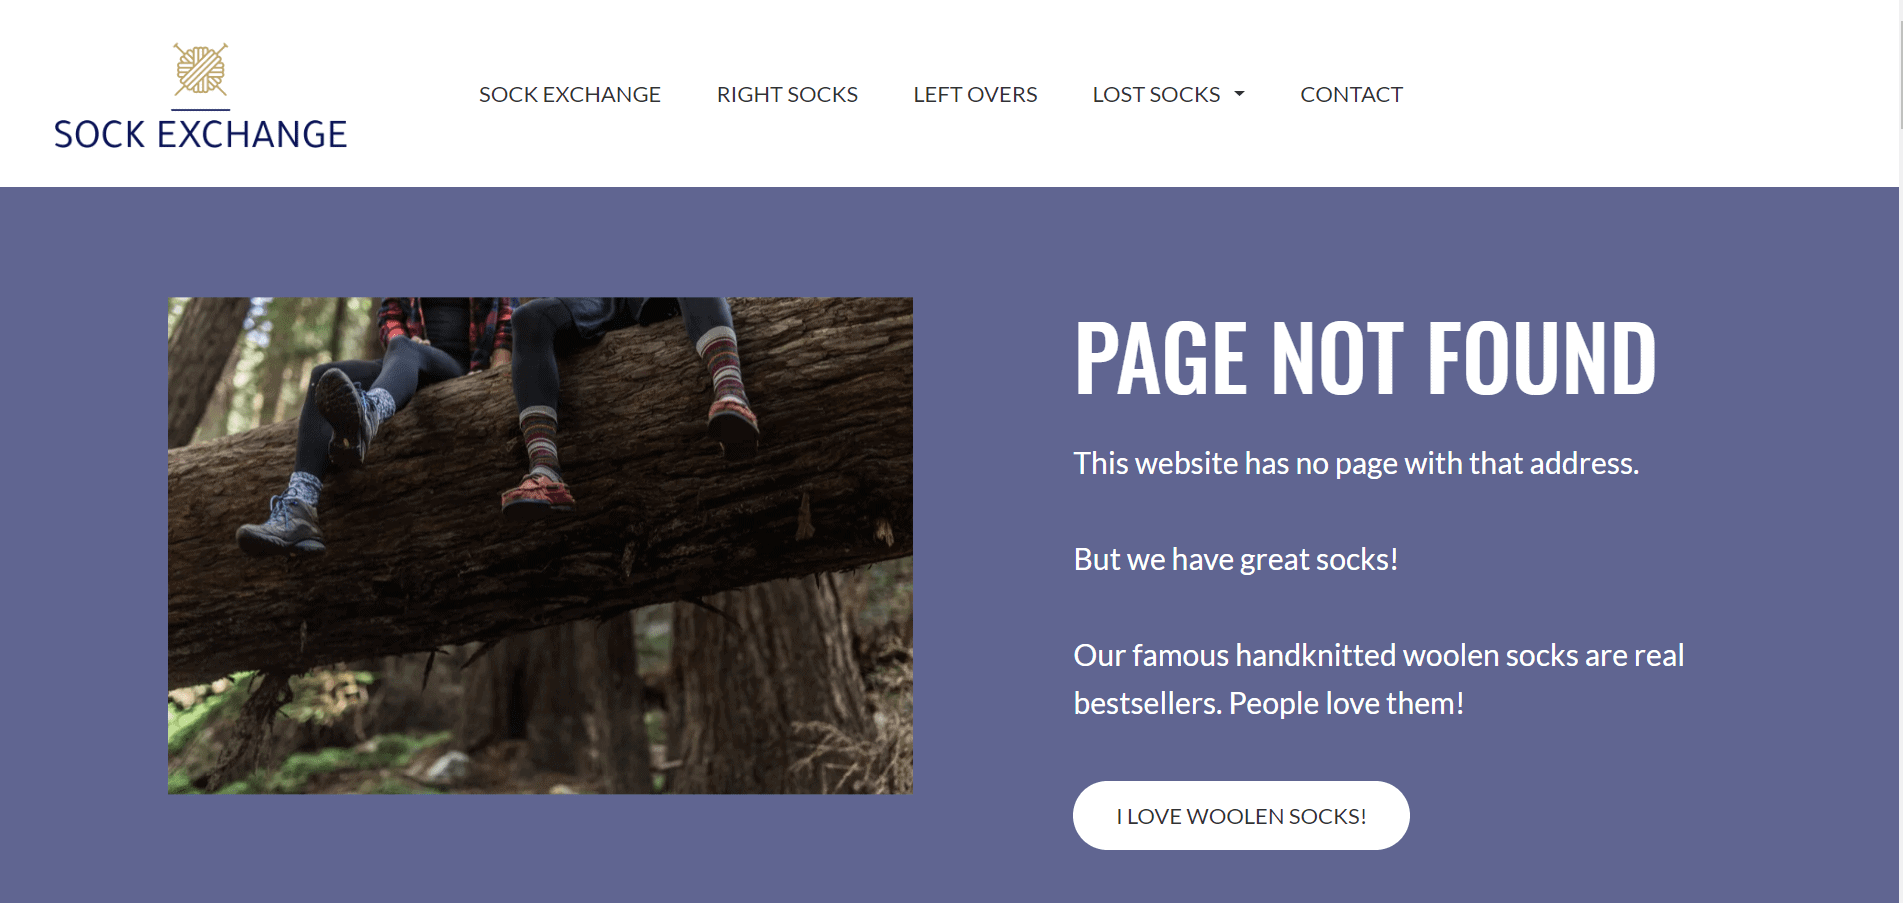 Example 404 page suggesting content